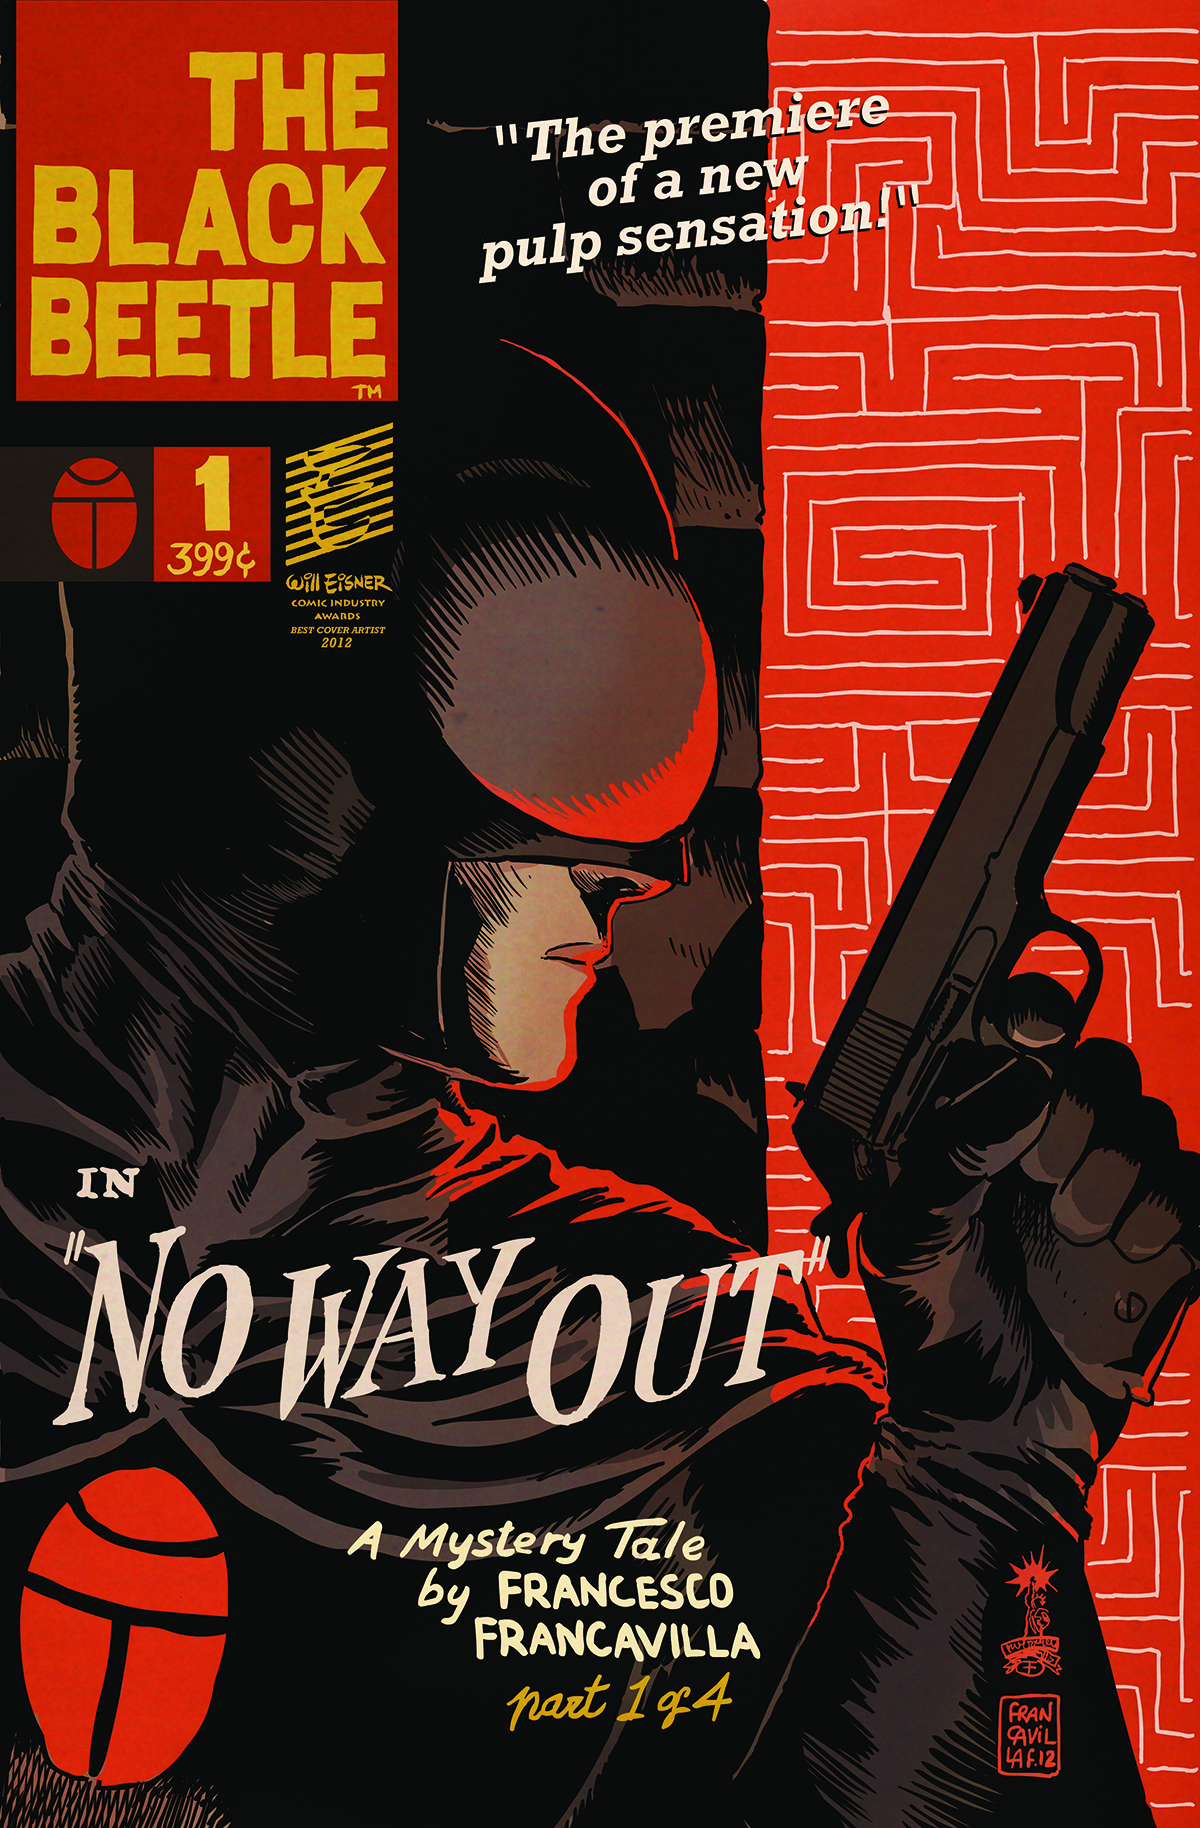 The Black Beetle: No Way Out Pics, Comics Collection